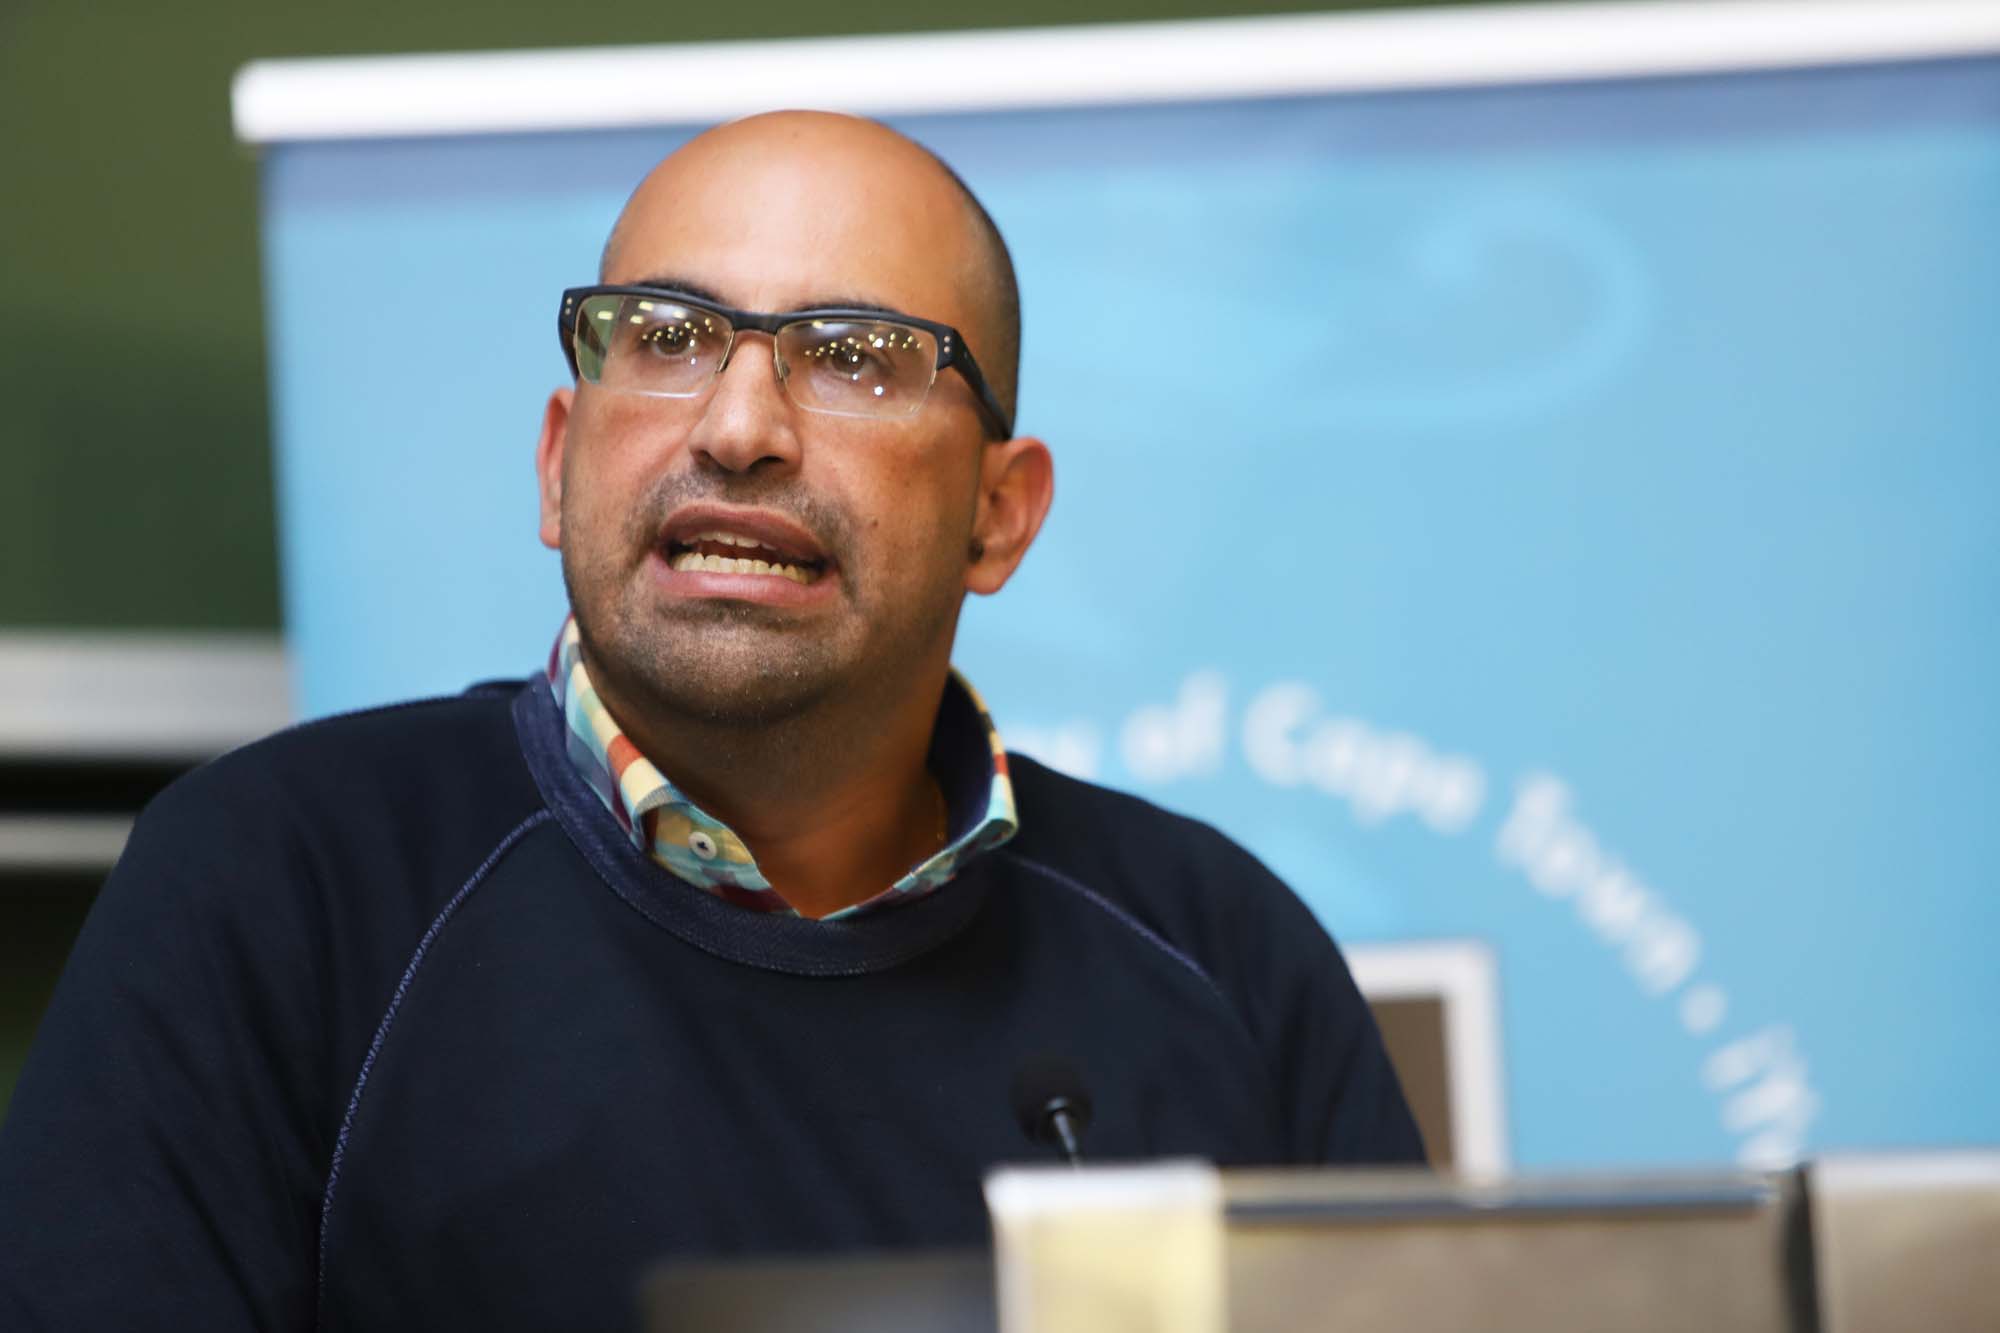 Palestinian-American scholar, author and public speaker Dr Steven Salaita delivered the annual TB Davie Memorial Lecture, titled “The inhumanity of academic freedom”, on 7 August.